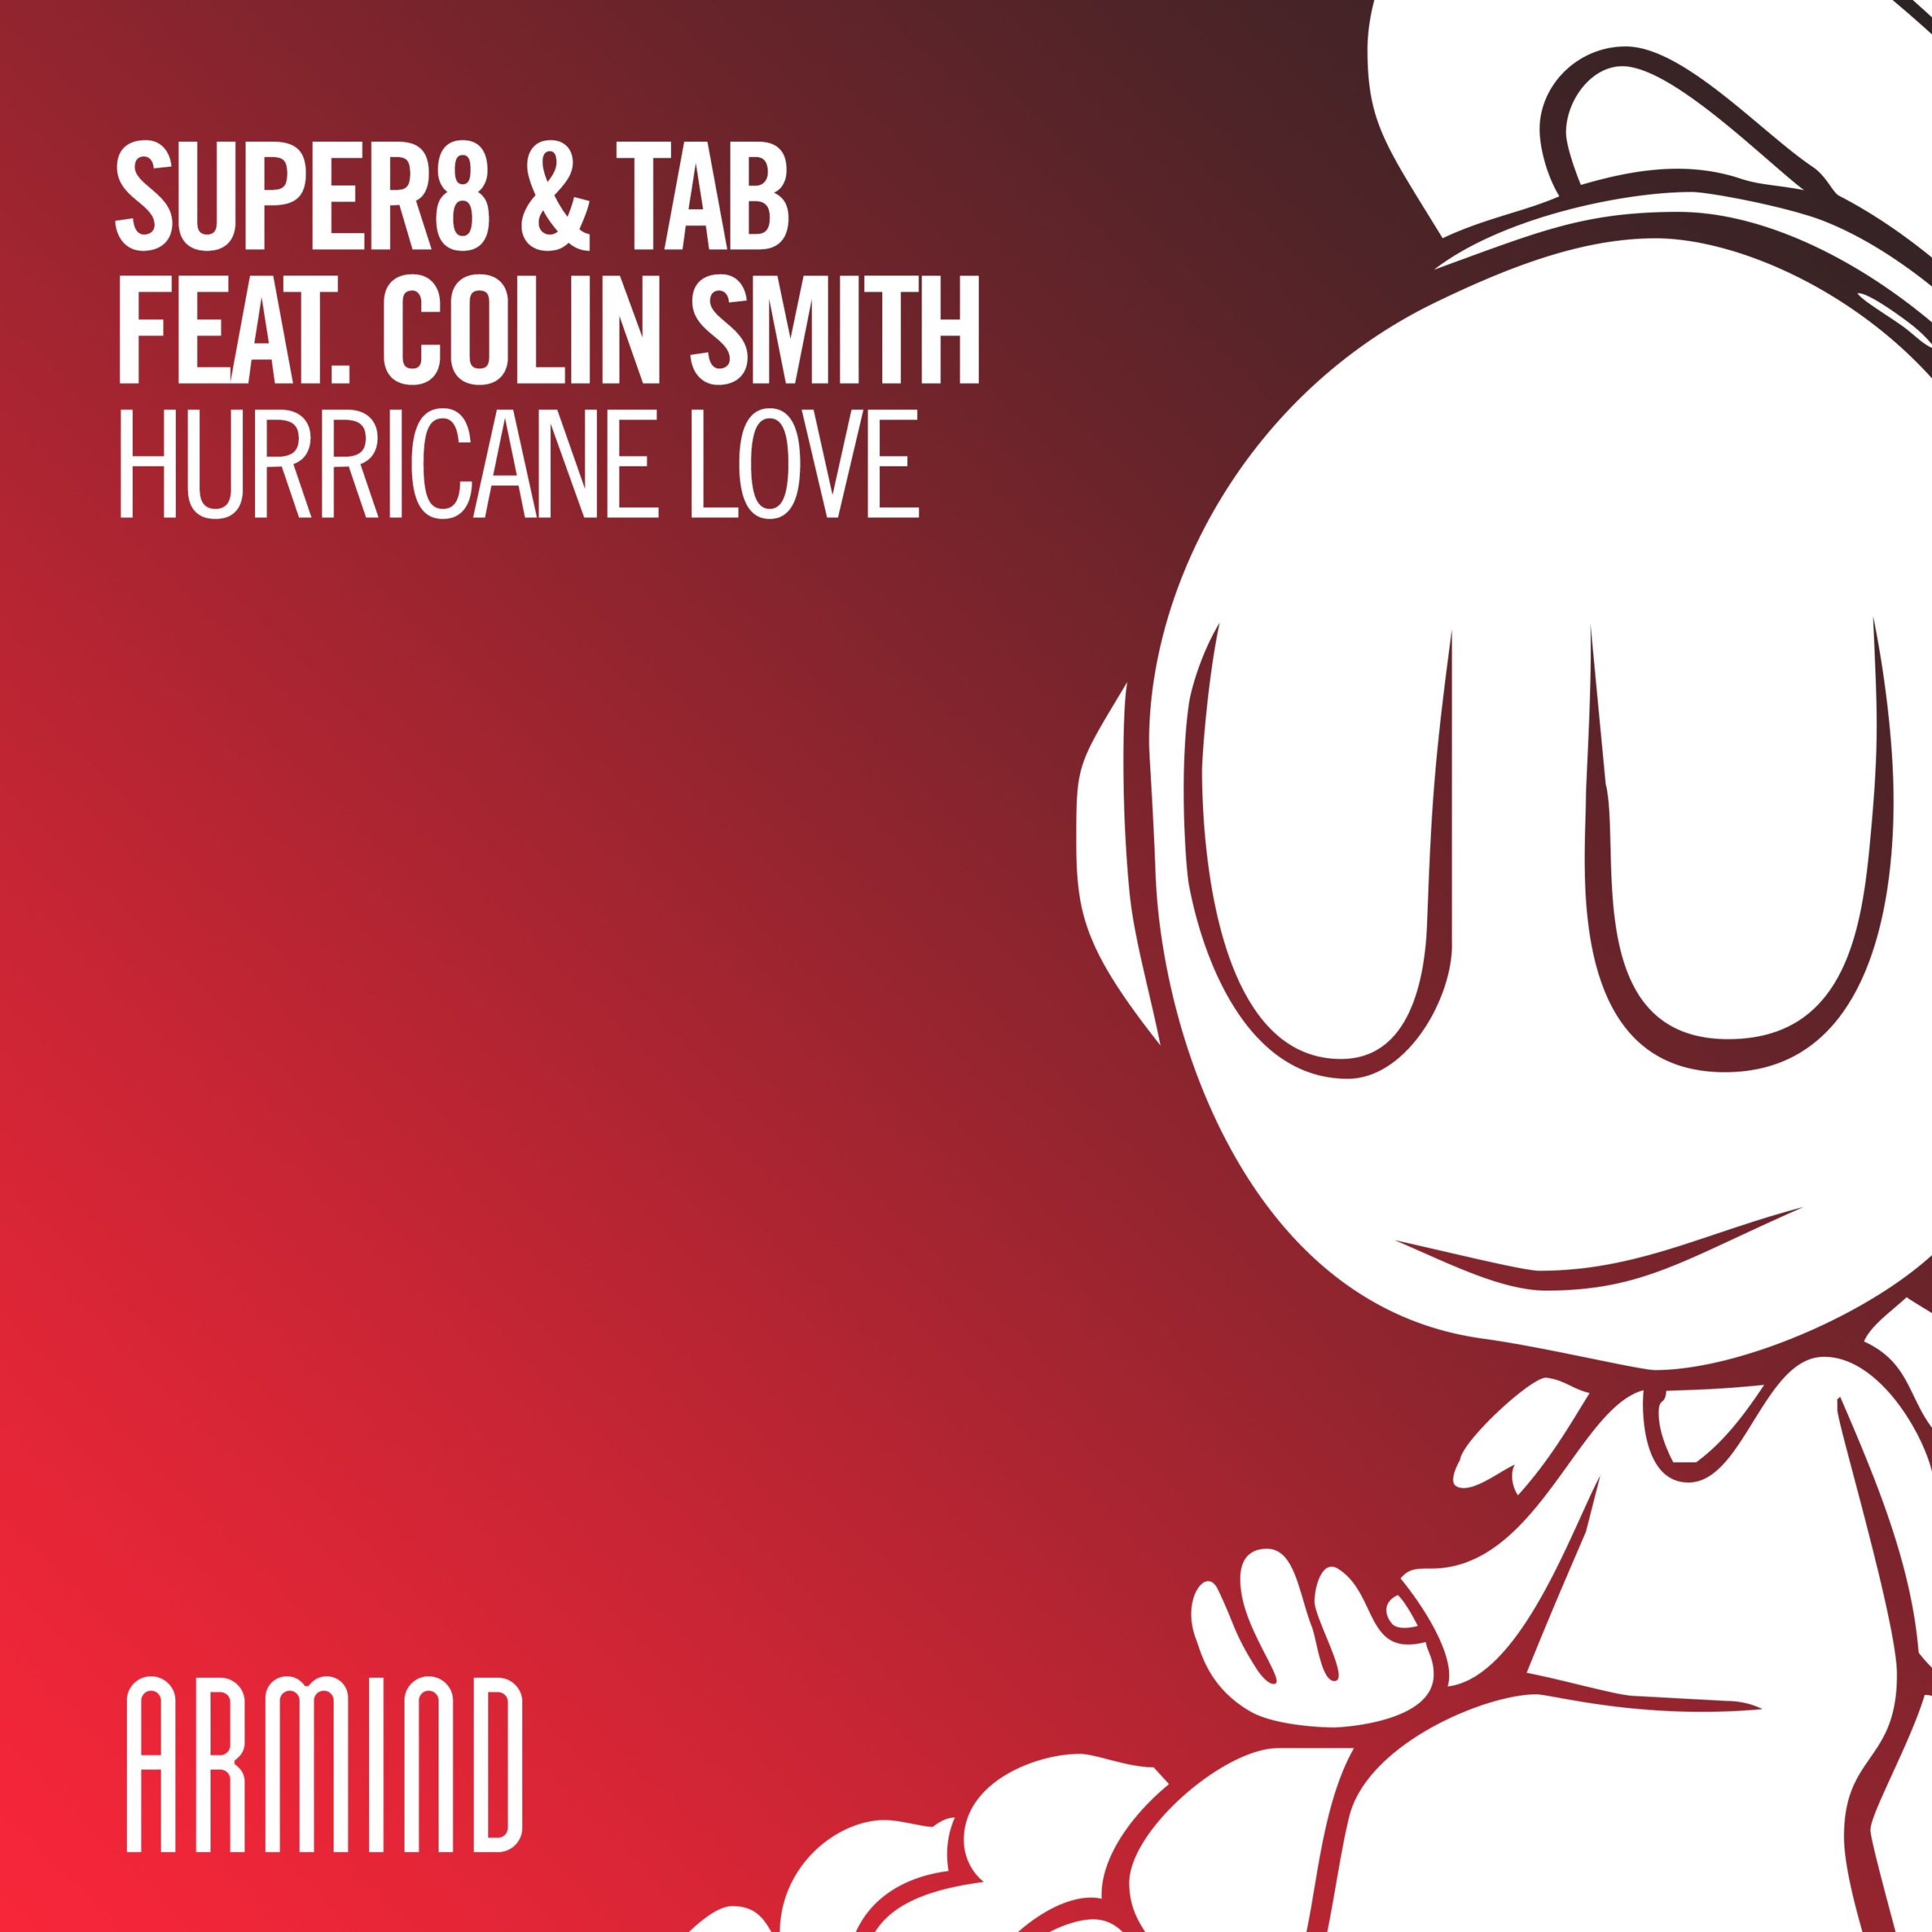 Super8 and Tab feat. Colin Smith presents Hurricane Love on Armind